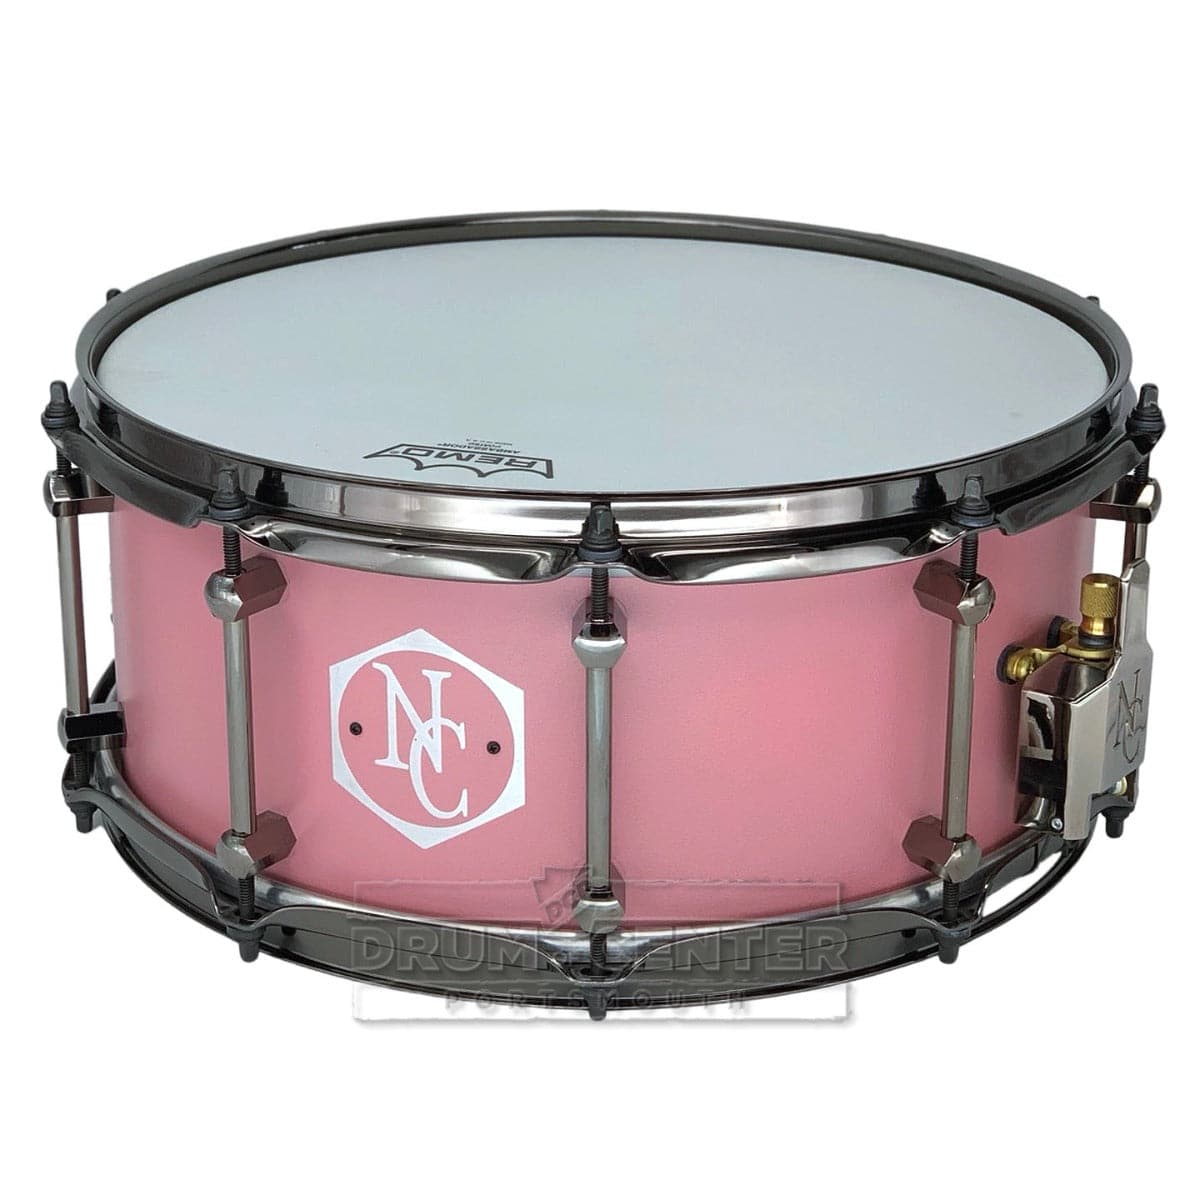 Noble & Cooley Alloy Classic Painted Snare Drum 14x6 Flat Pink w/Black Hw